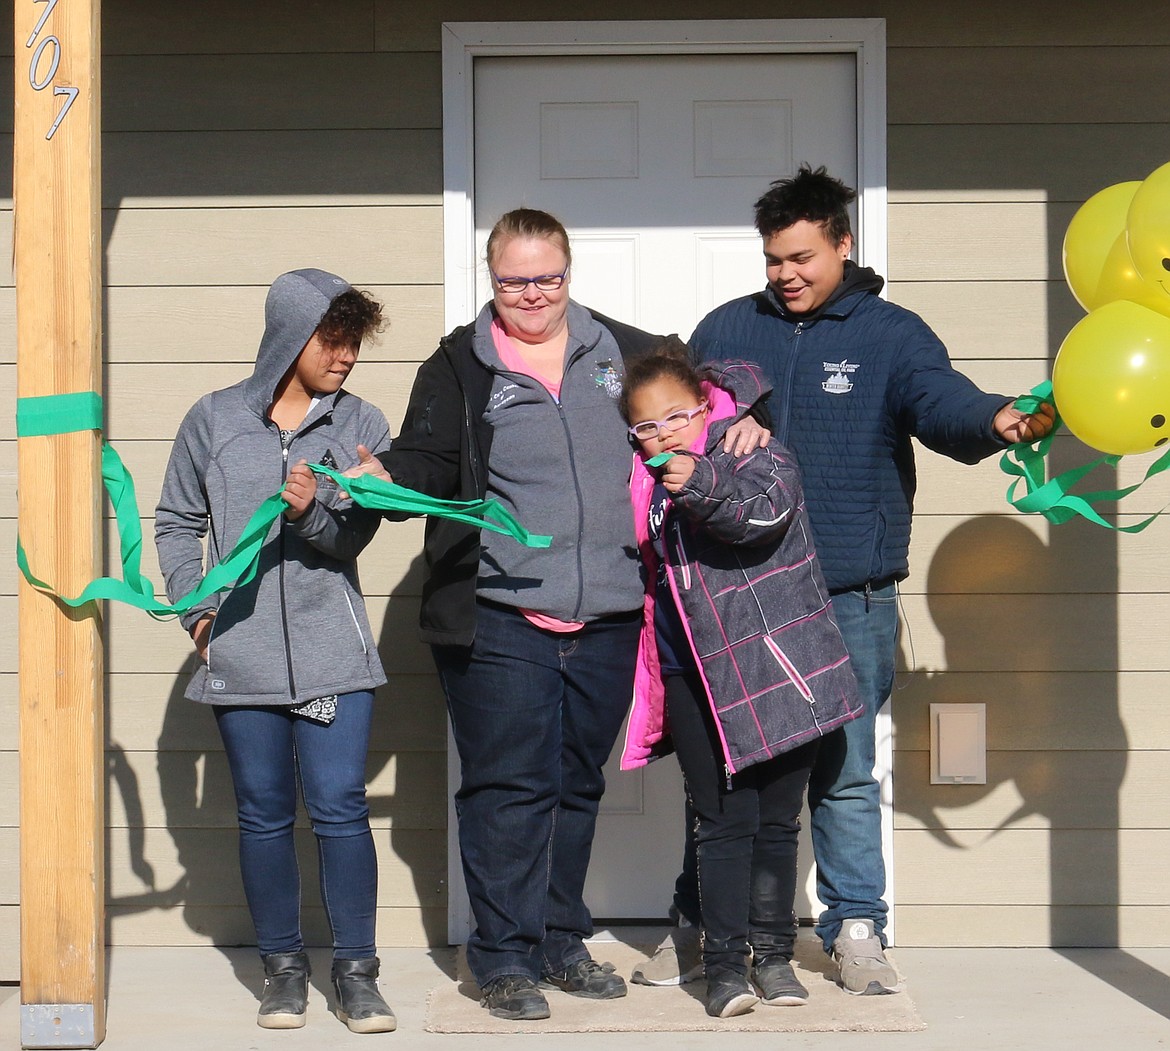 The Wolf family tears down the ribbon, opening the door to their new house from Boundary County Fuller Center for Housing.